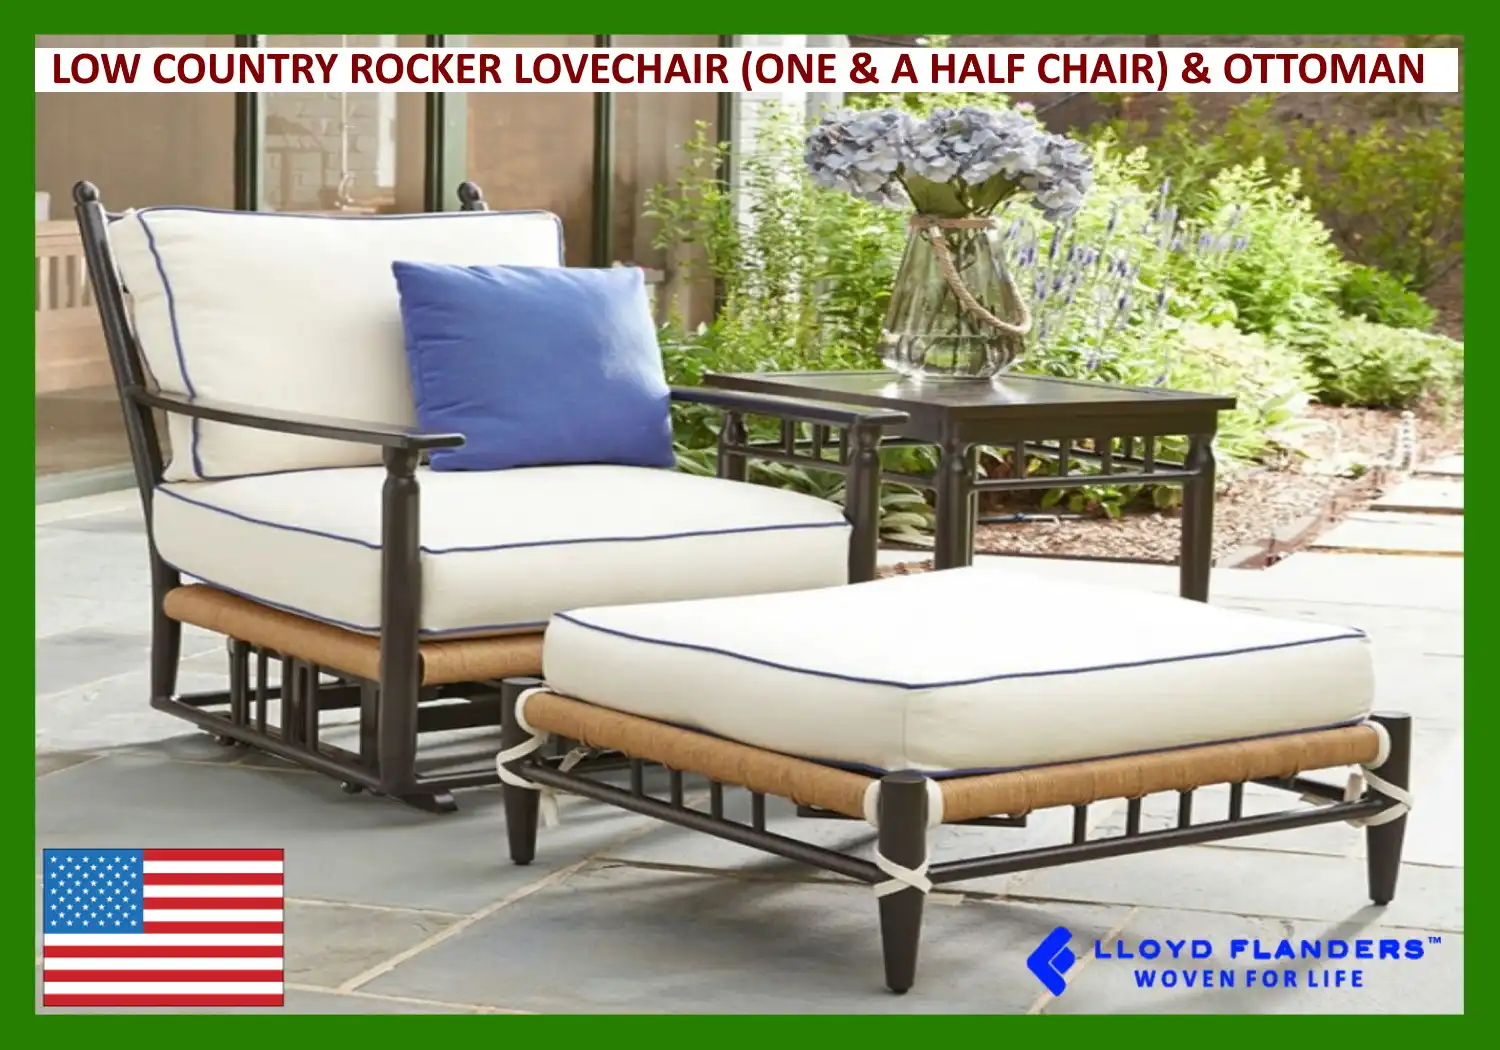 LOW COUNTRY ROCKER LOVECHAIR (ONE & A HALF CHAIR) & OTTOMAN